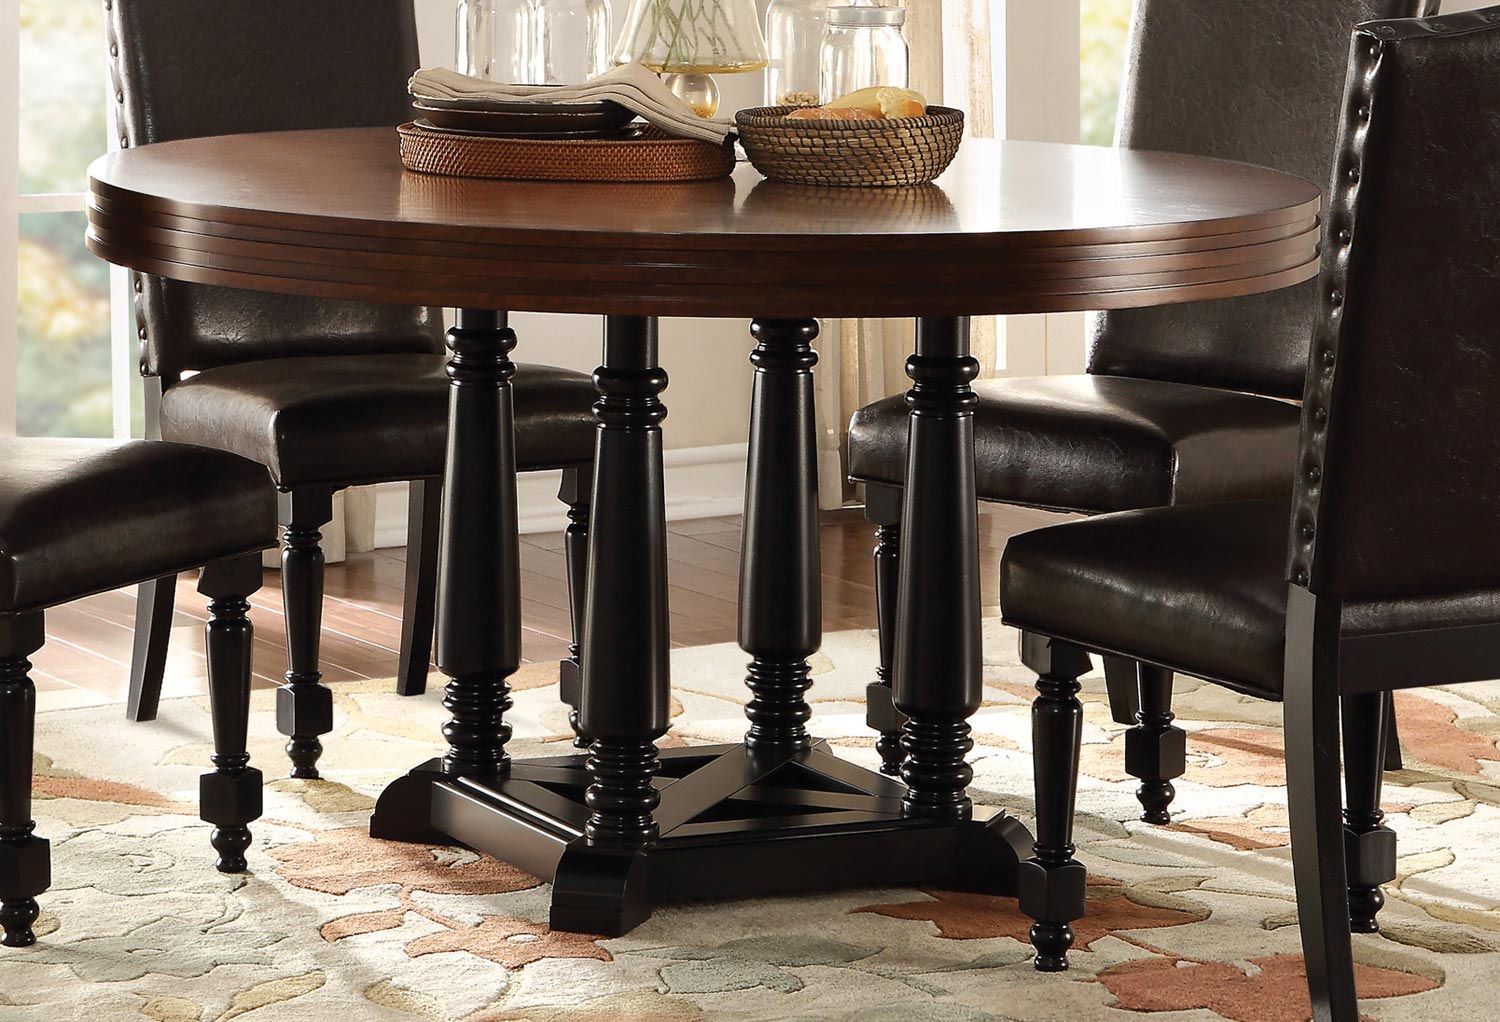 Homelegance Blossomwood Round Dining Table - Cherry/Black